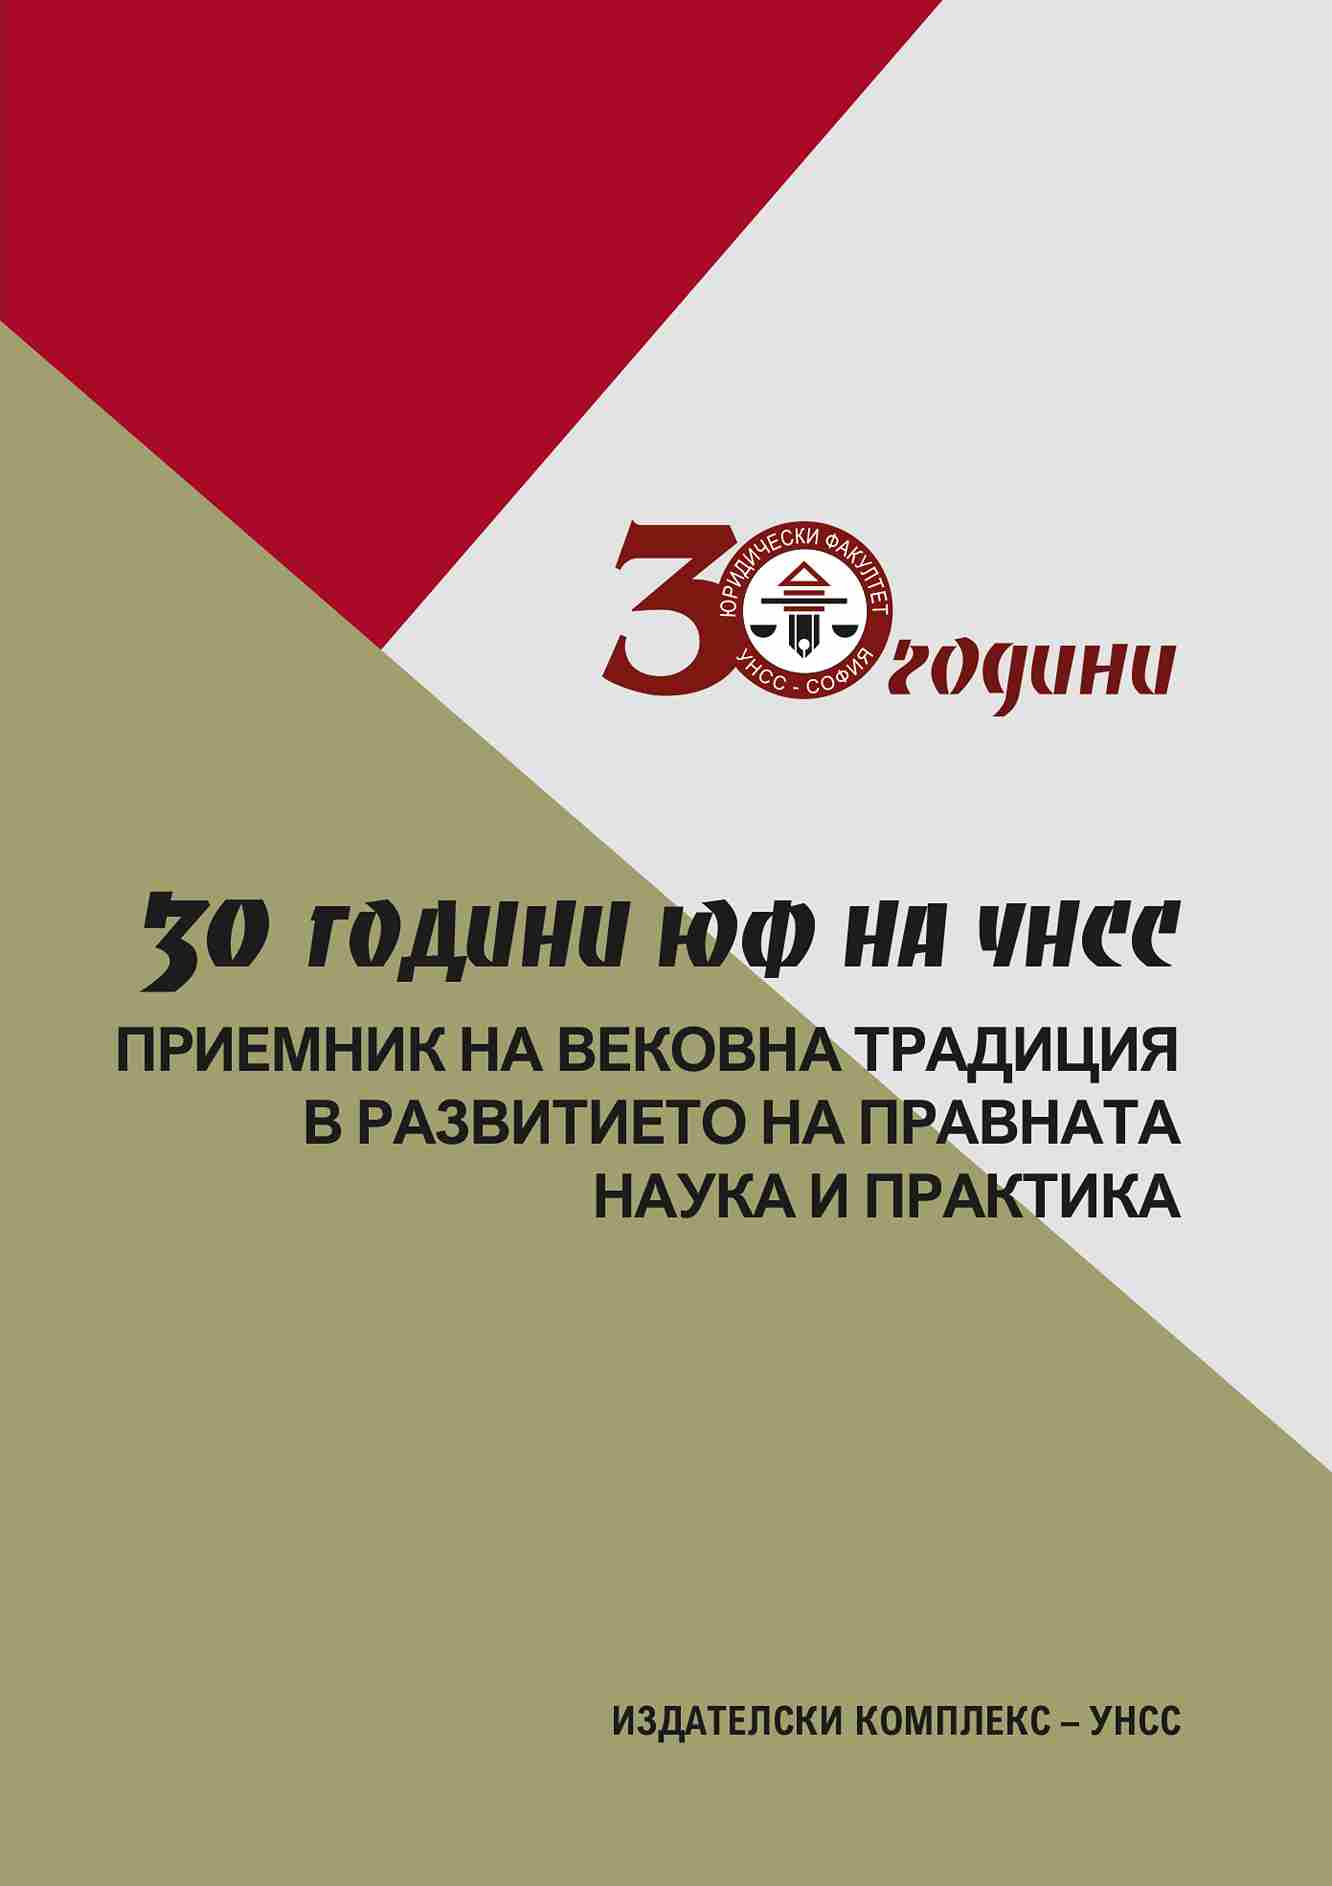 Scientific conference "30 years Faculty of Law UNWE"